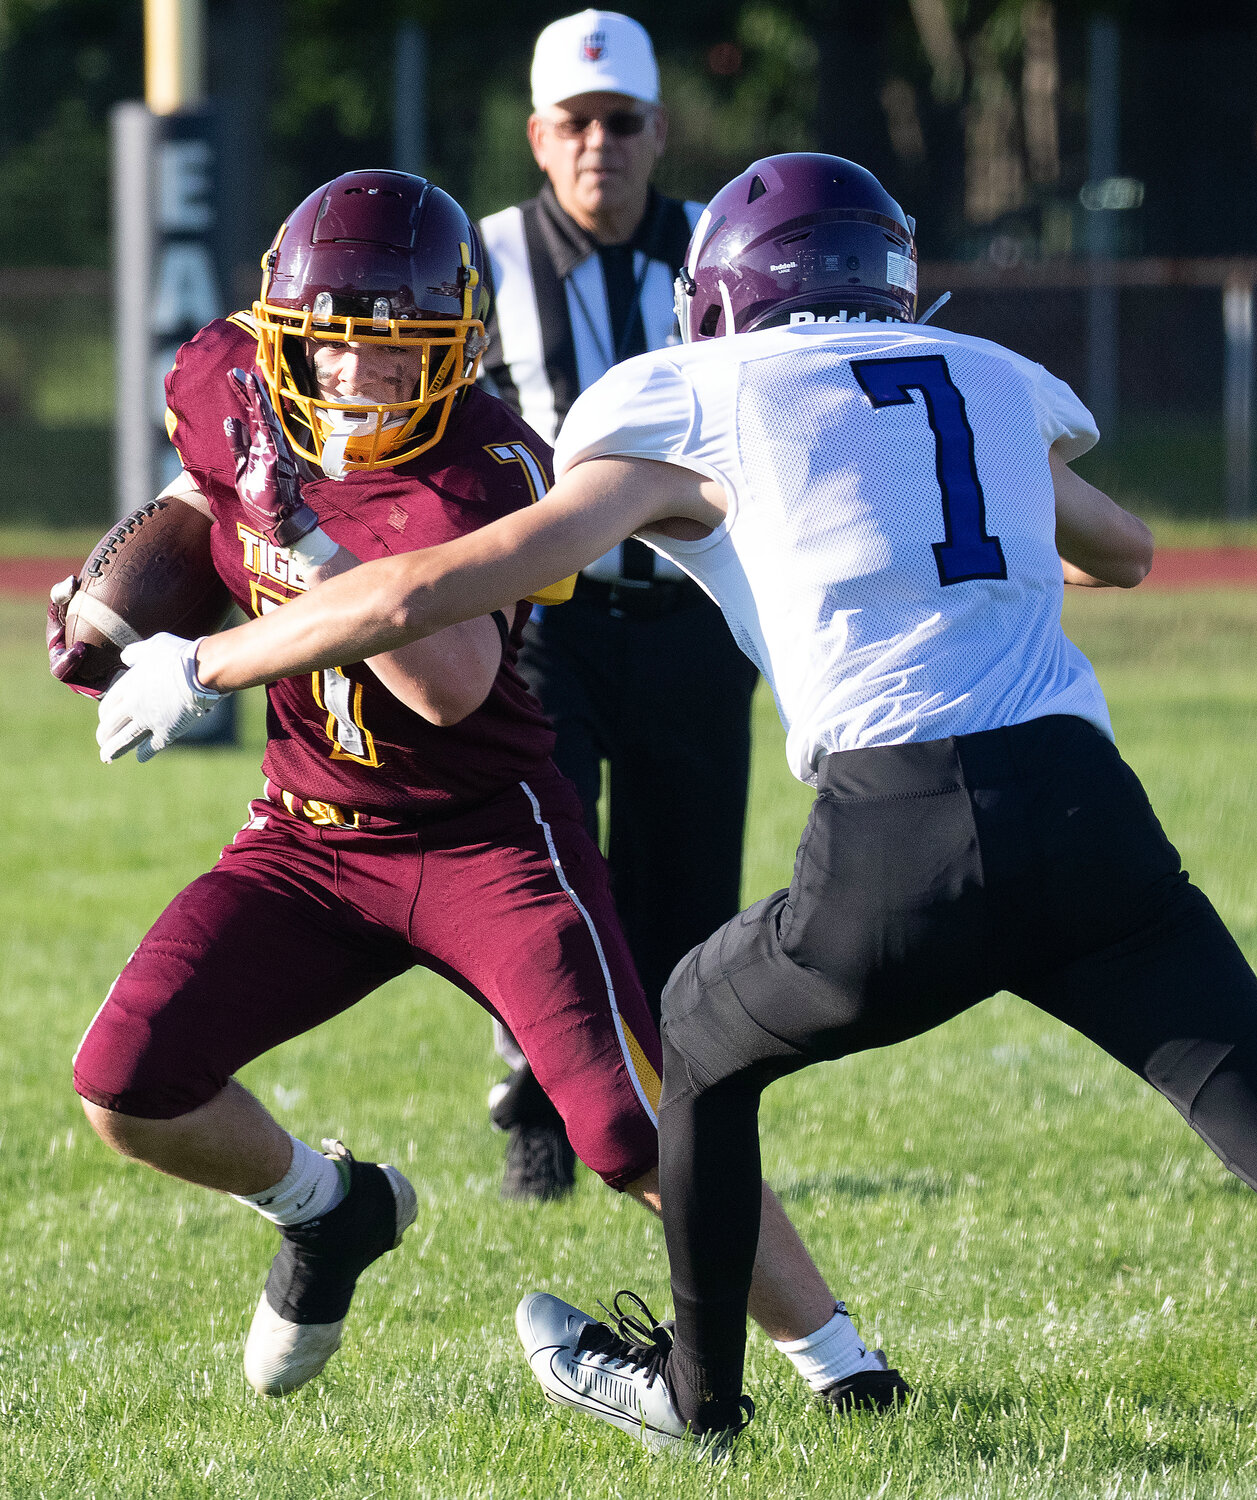 Running back Aiden Champ looks to deke a Huskies defender during an outside run.